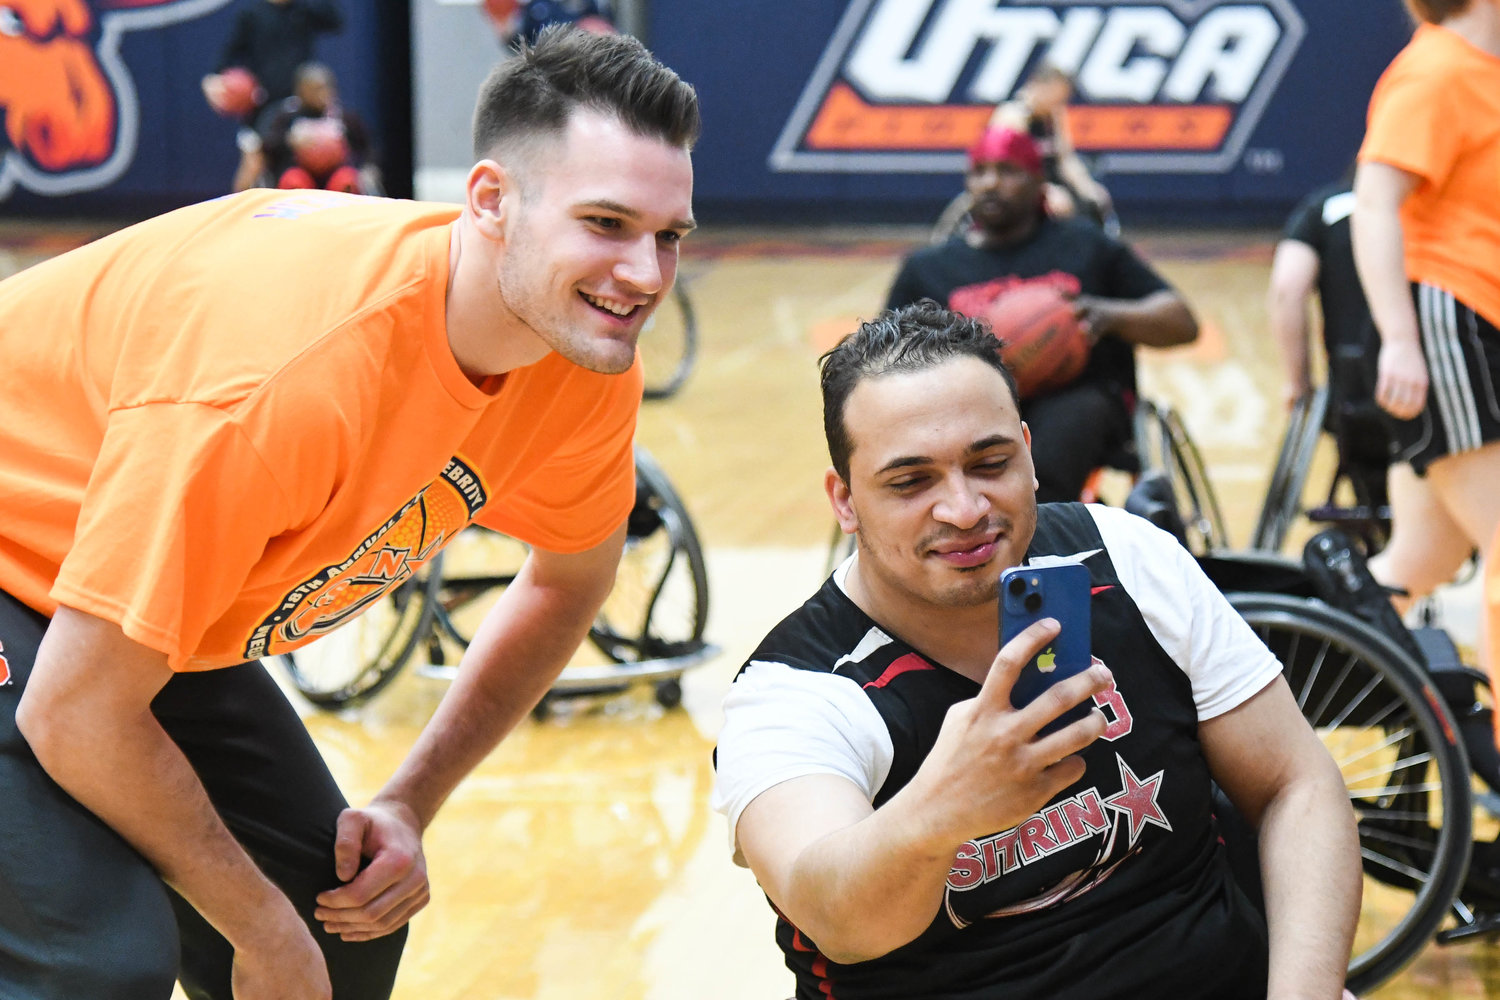 PICTURE TIME — Devon Henry takes a selfie with Syracuse Orange player Jimmy Boeheim before the start of the 18th annual Sitrin Celebrity Wheelchair Basketball Game on Thursday night at Utica University.